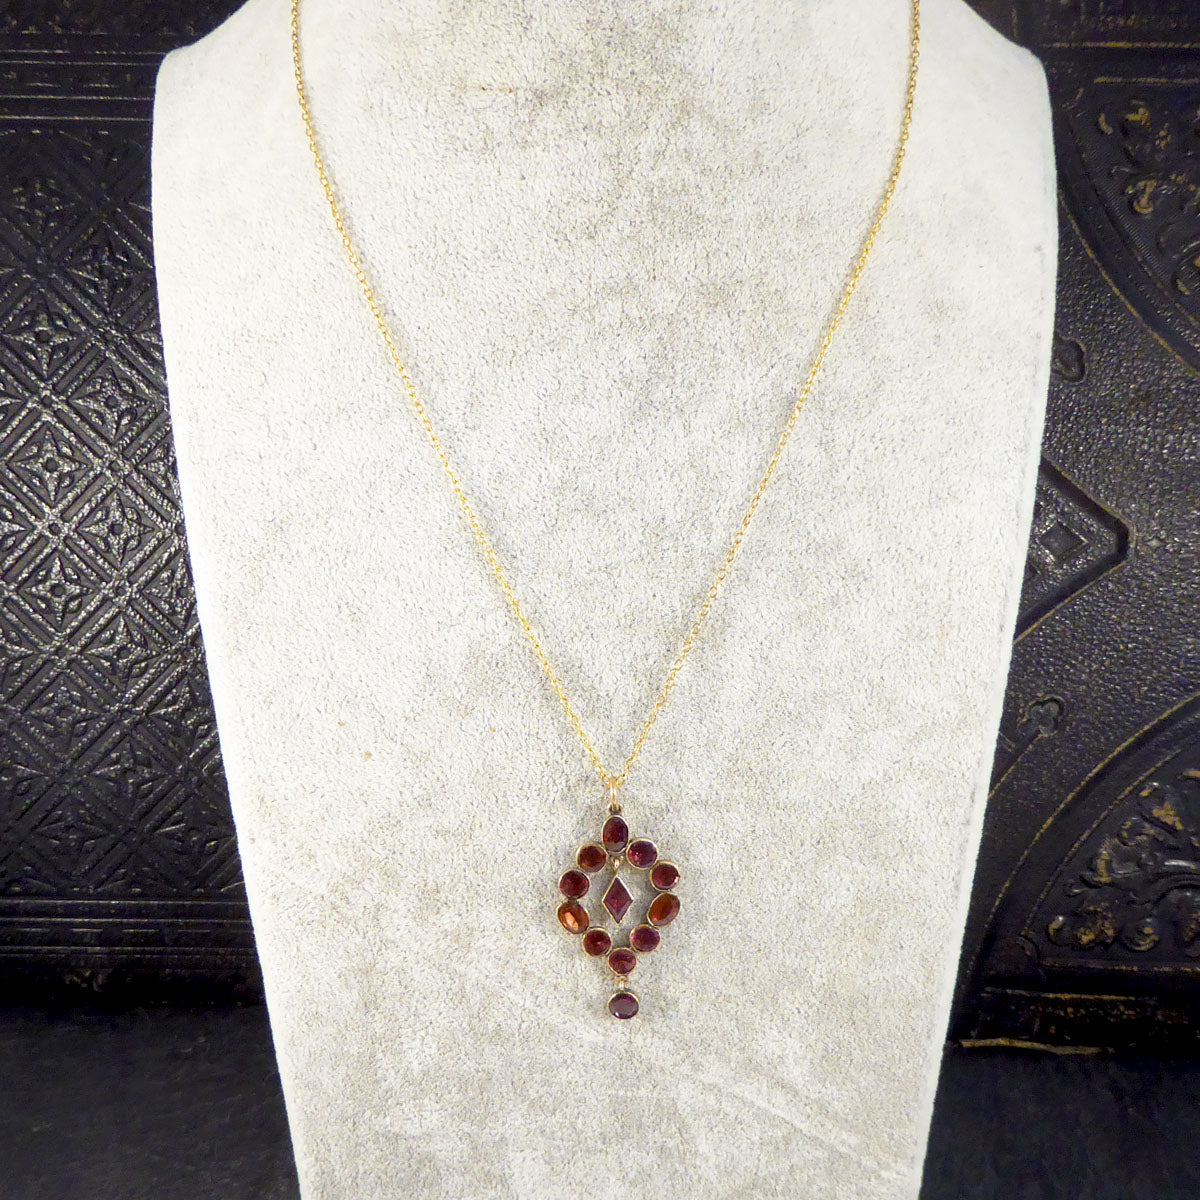 Antique Georgian Foiled Closed Back Garnet Drop Pendant Necklace in 9ct Yellow Gold